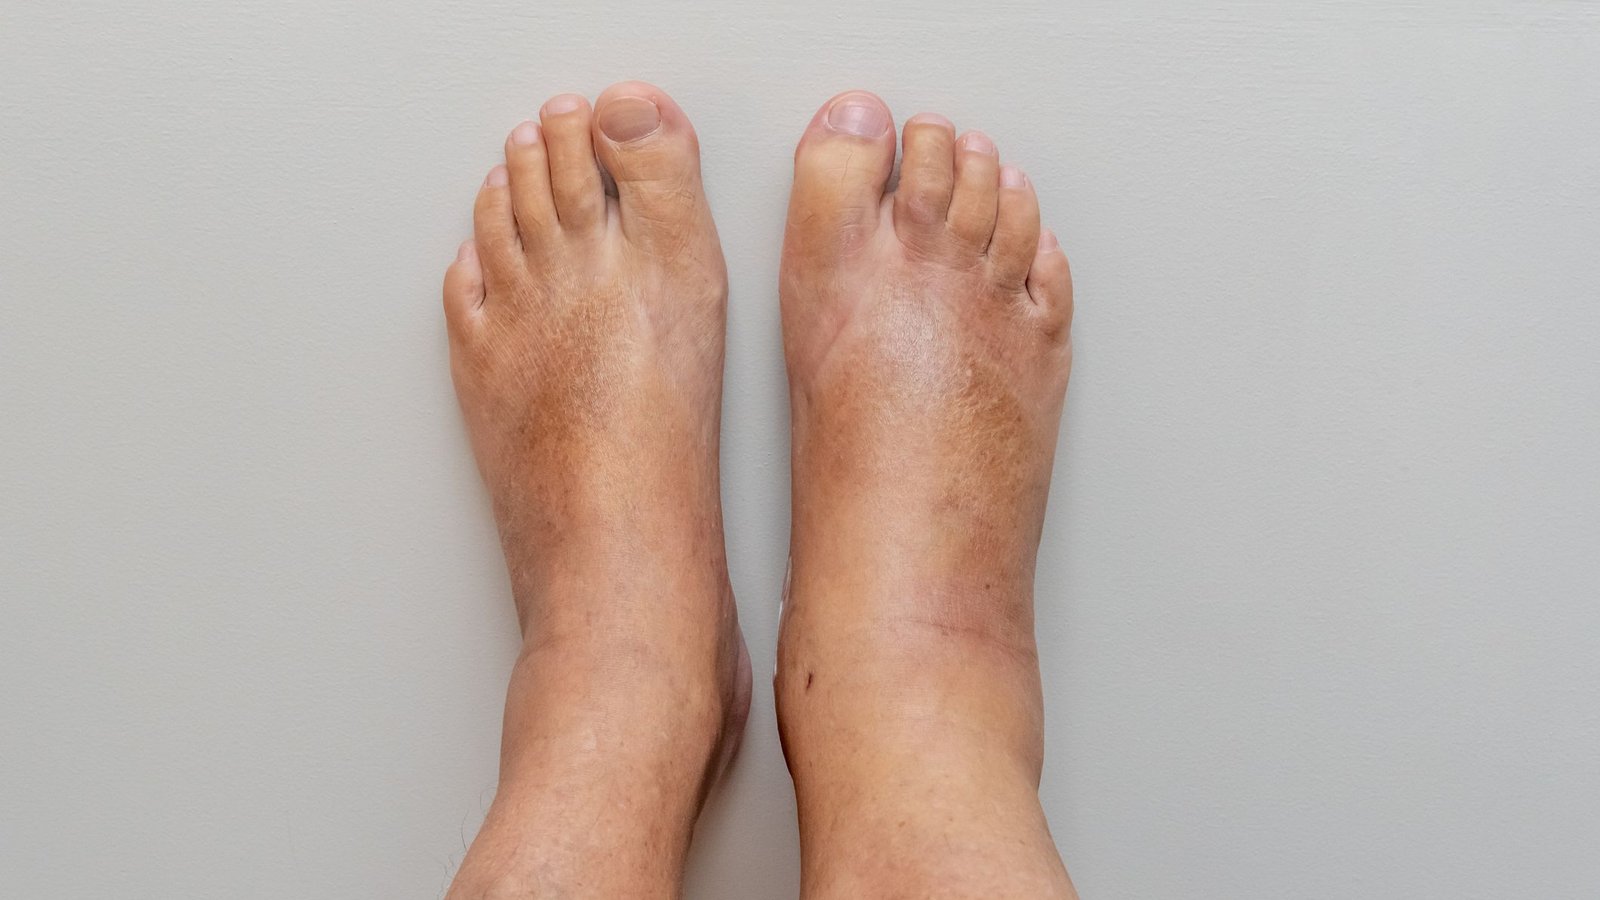 Reasons for continuous swelling